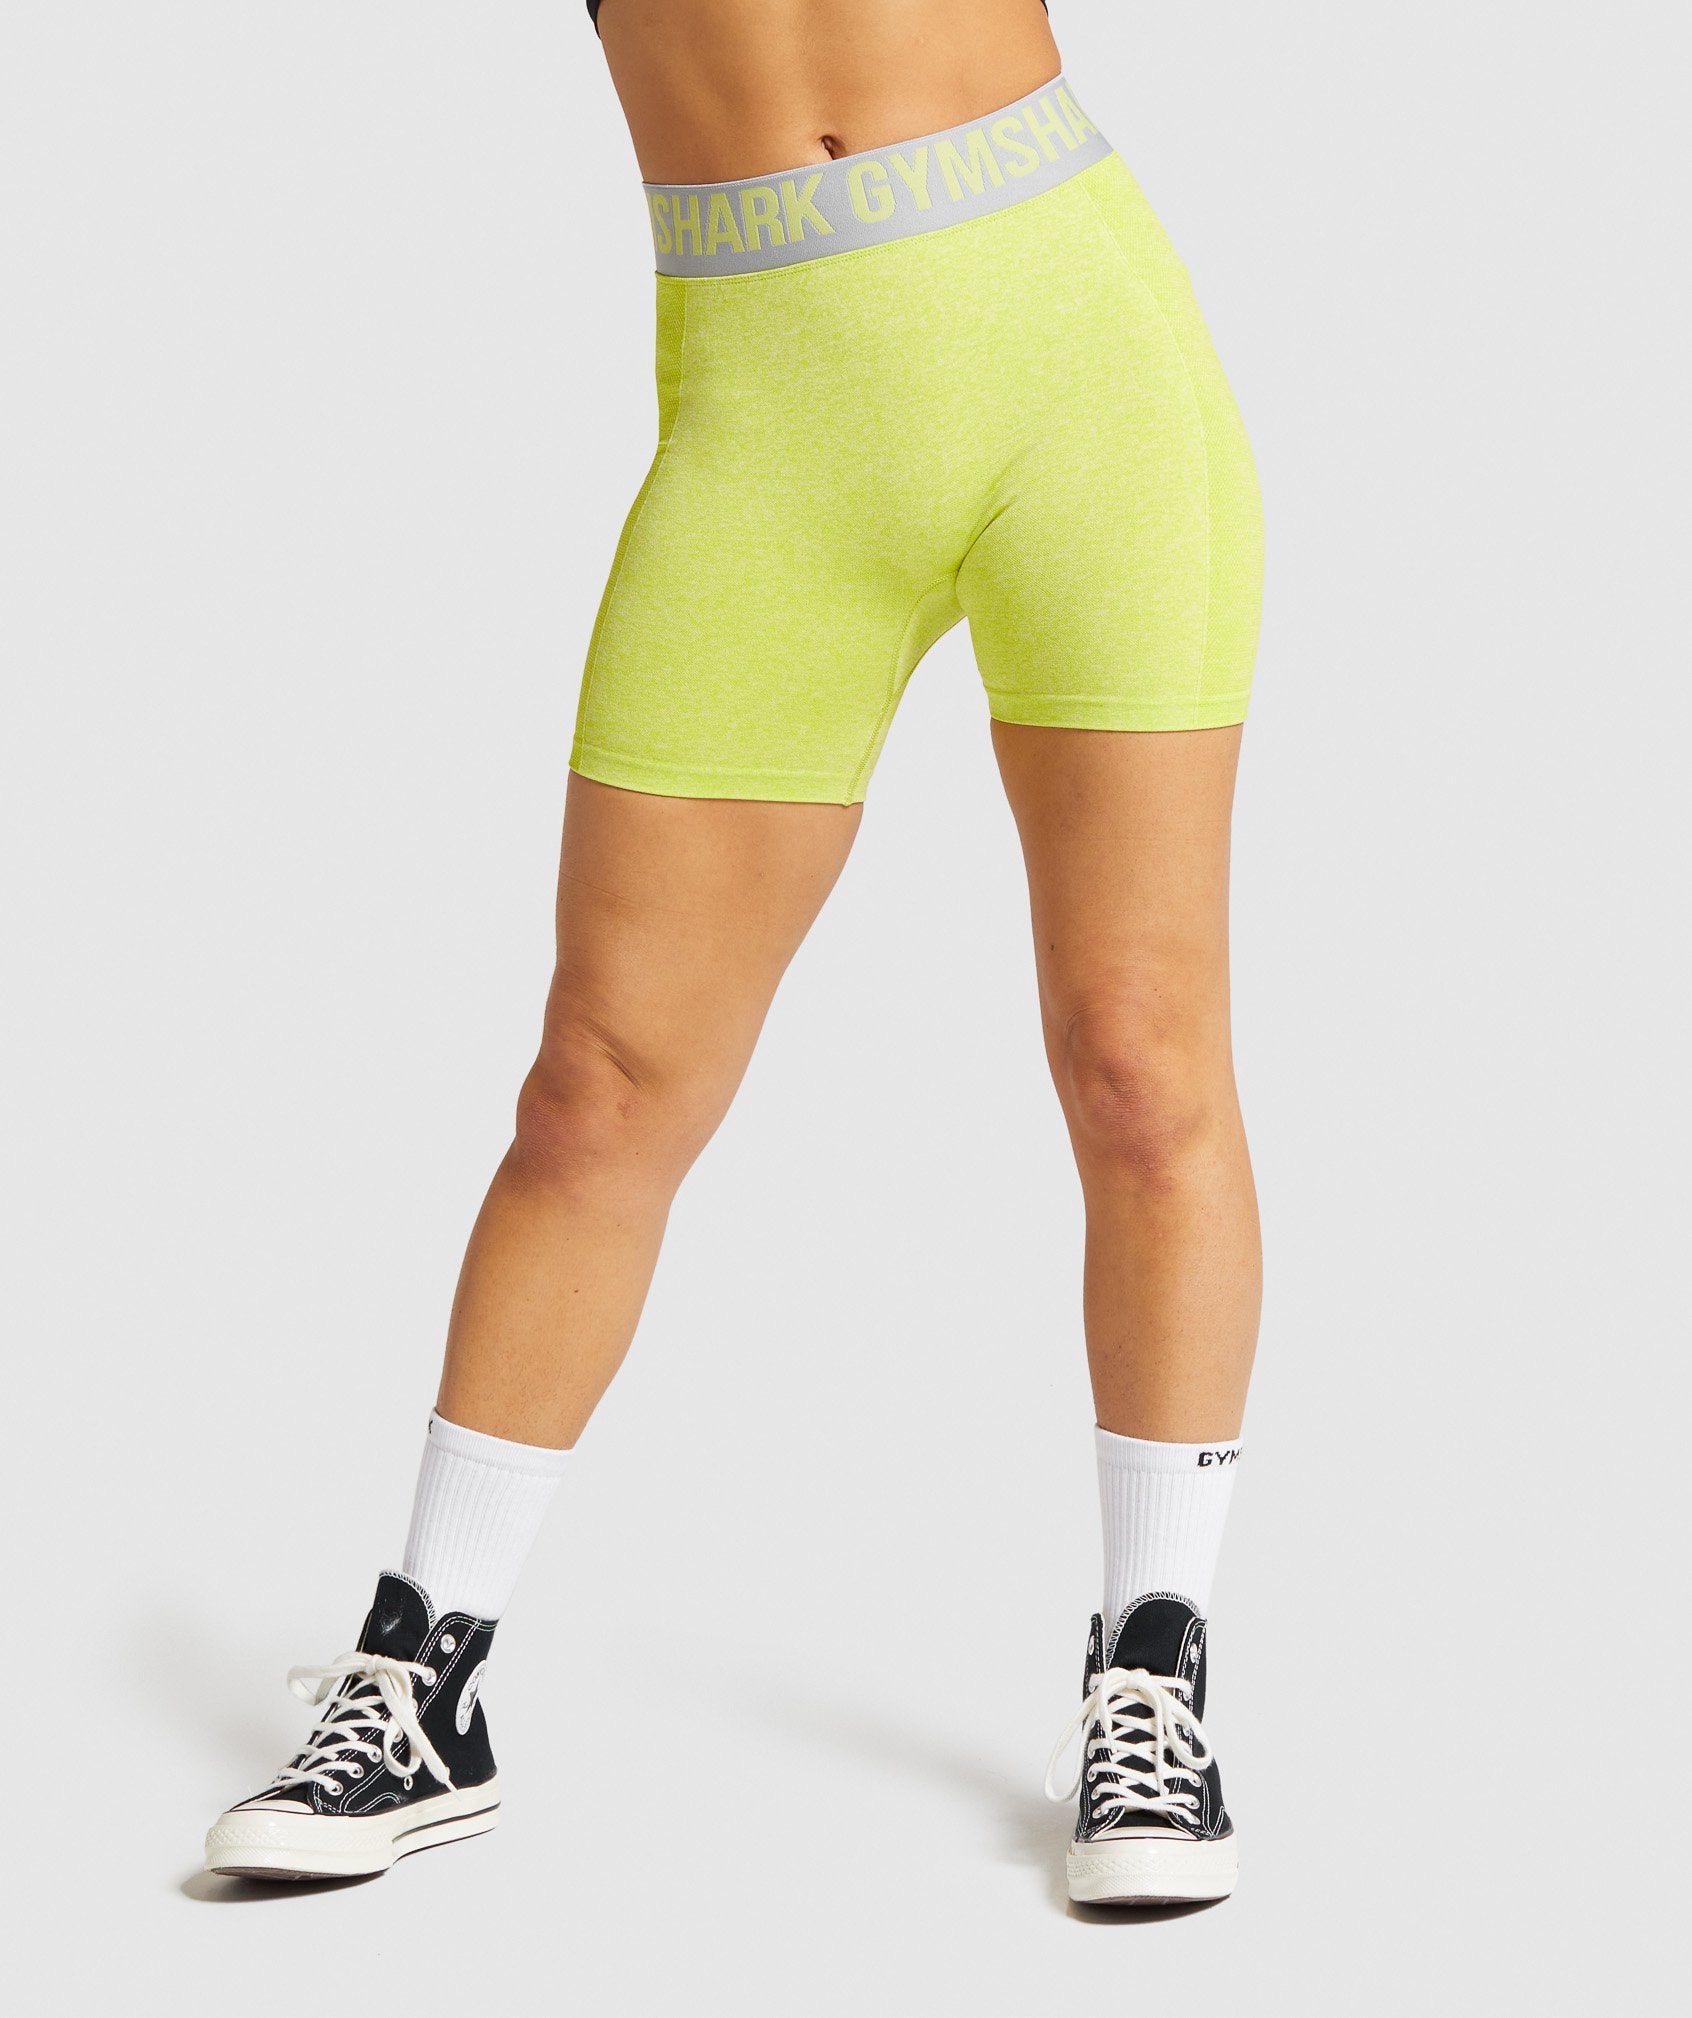 Flex Shorts in Lime Marl/Light Grey - view 1